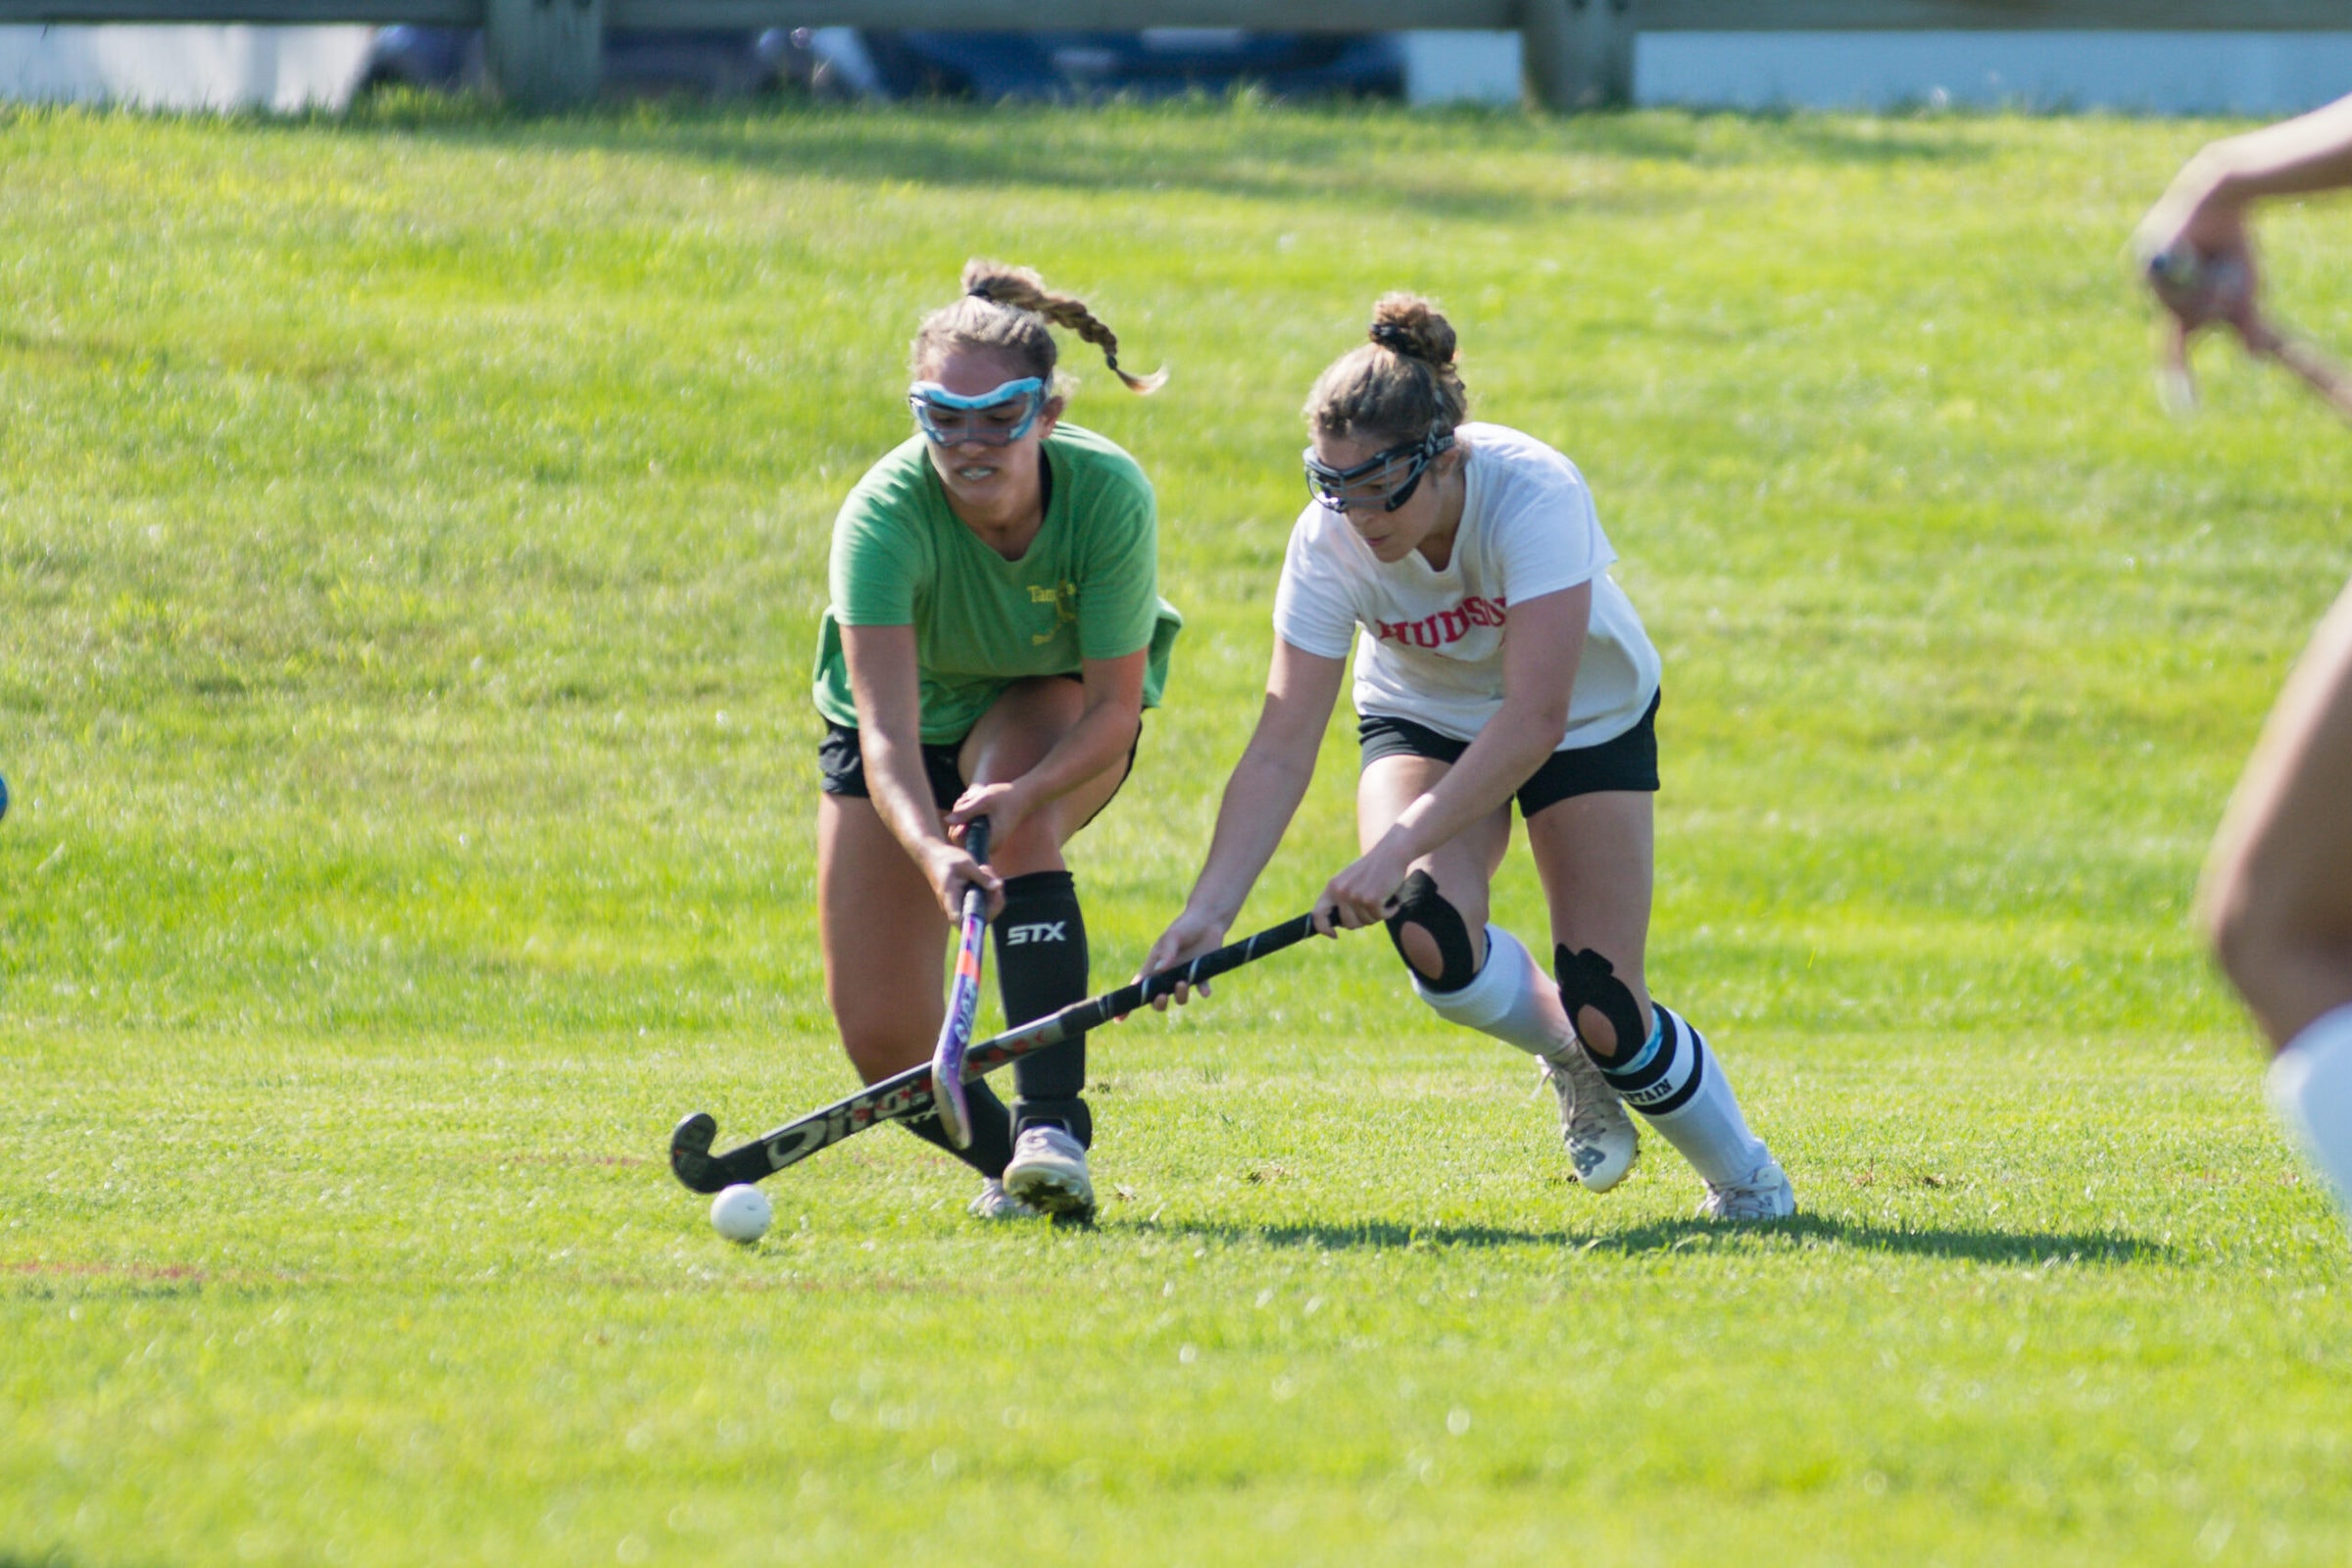 A Hudson field hockey player charges upfield during an Aug. 27 scrimmage. (Photo/Jesse Kucewicz)